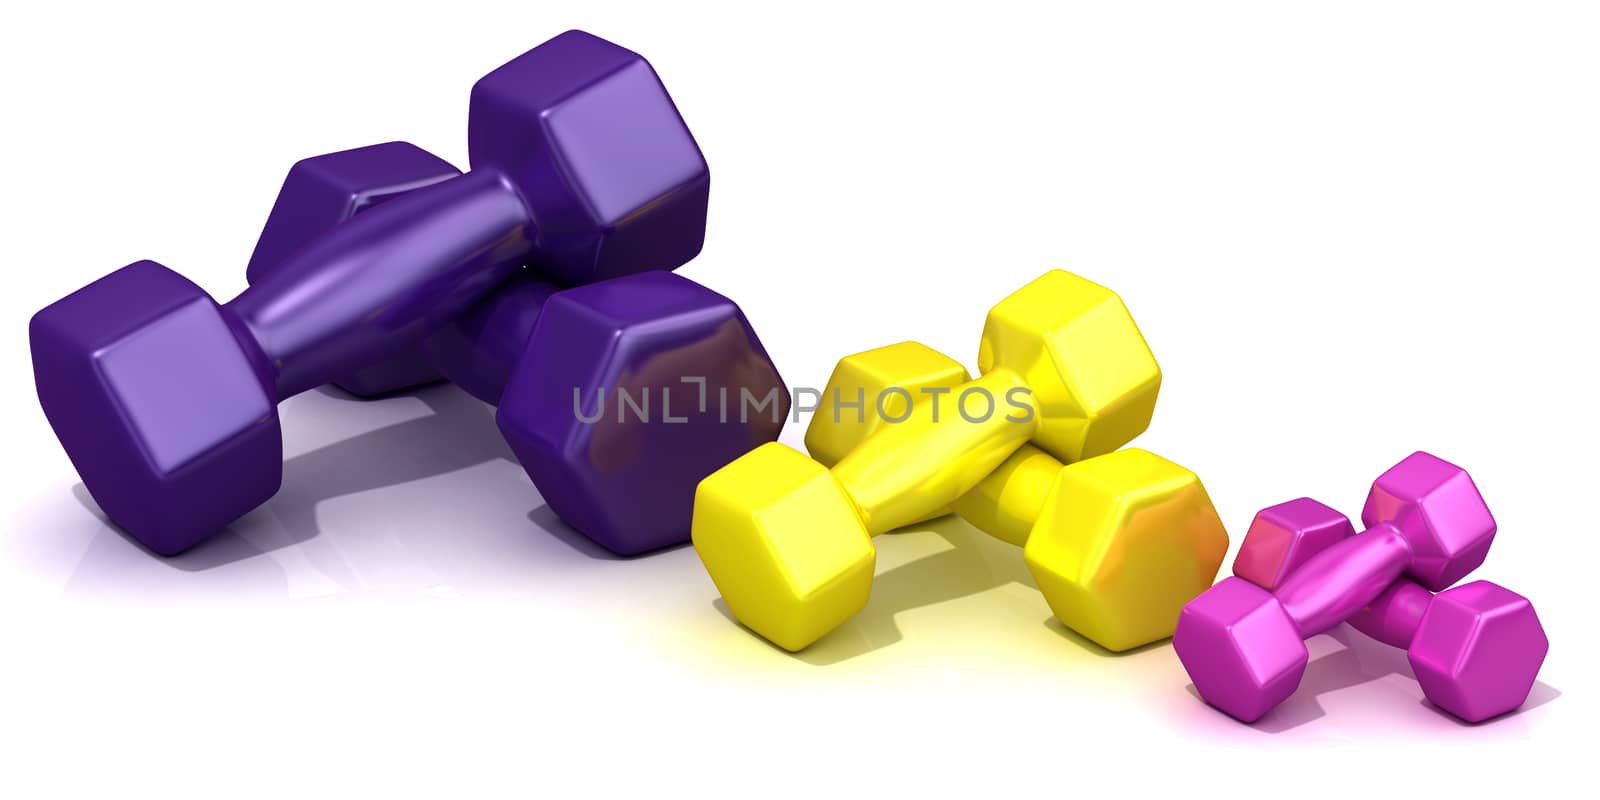 Colorful weights by djmilic